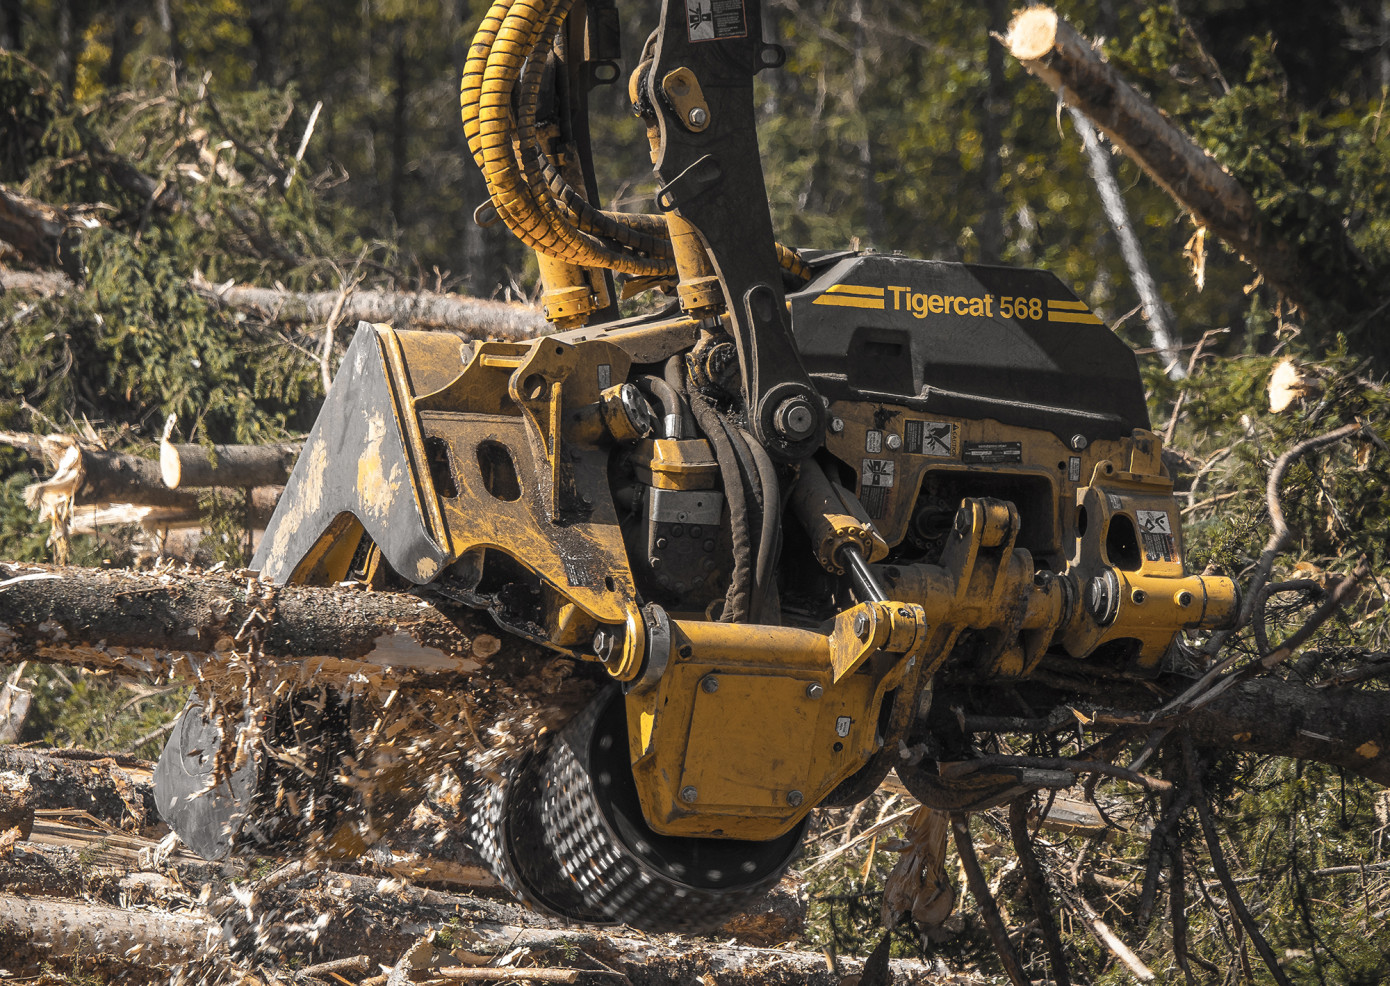 Tigercat launches new harvesting head